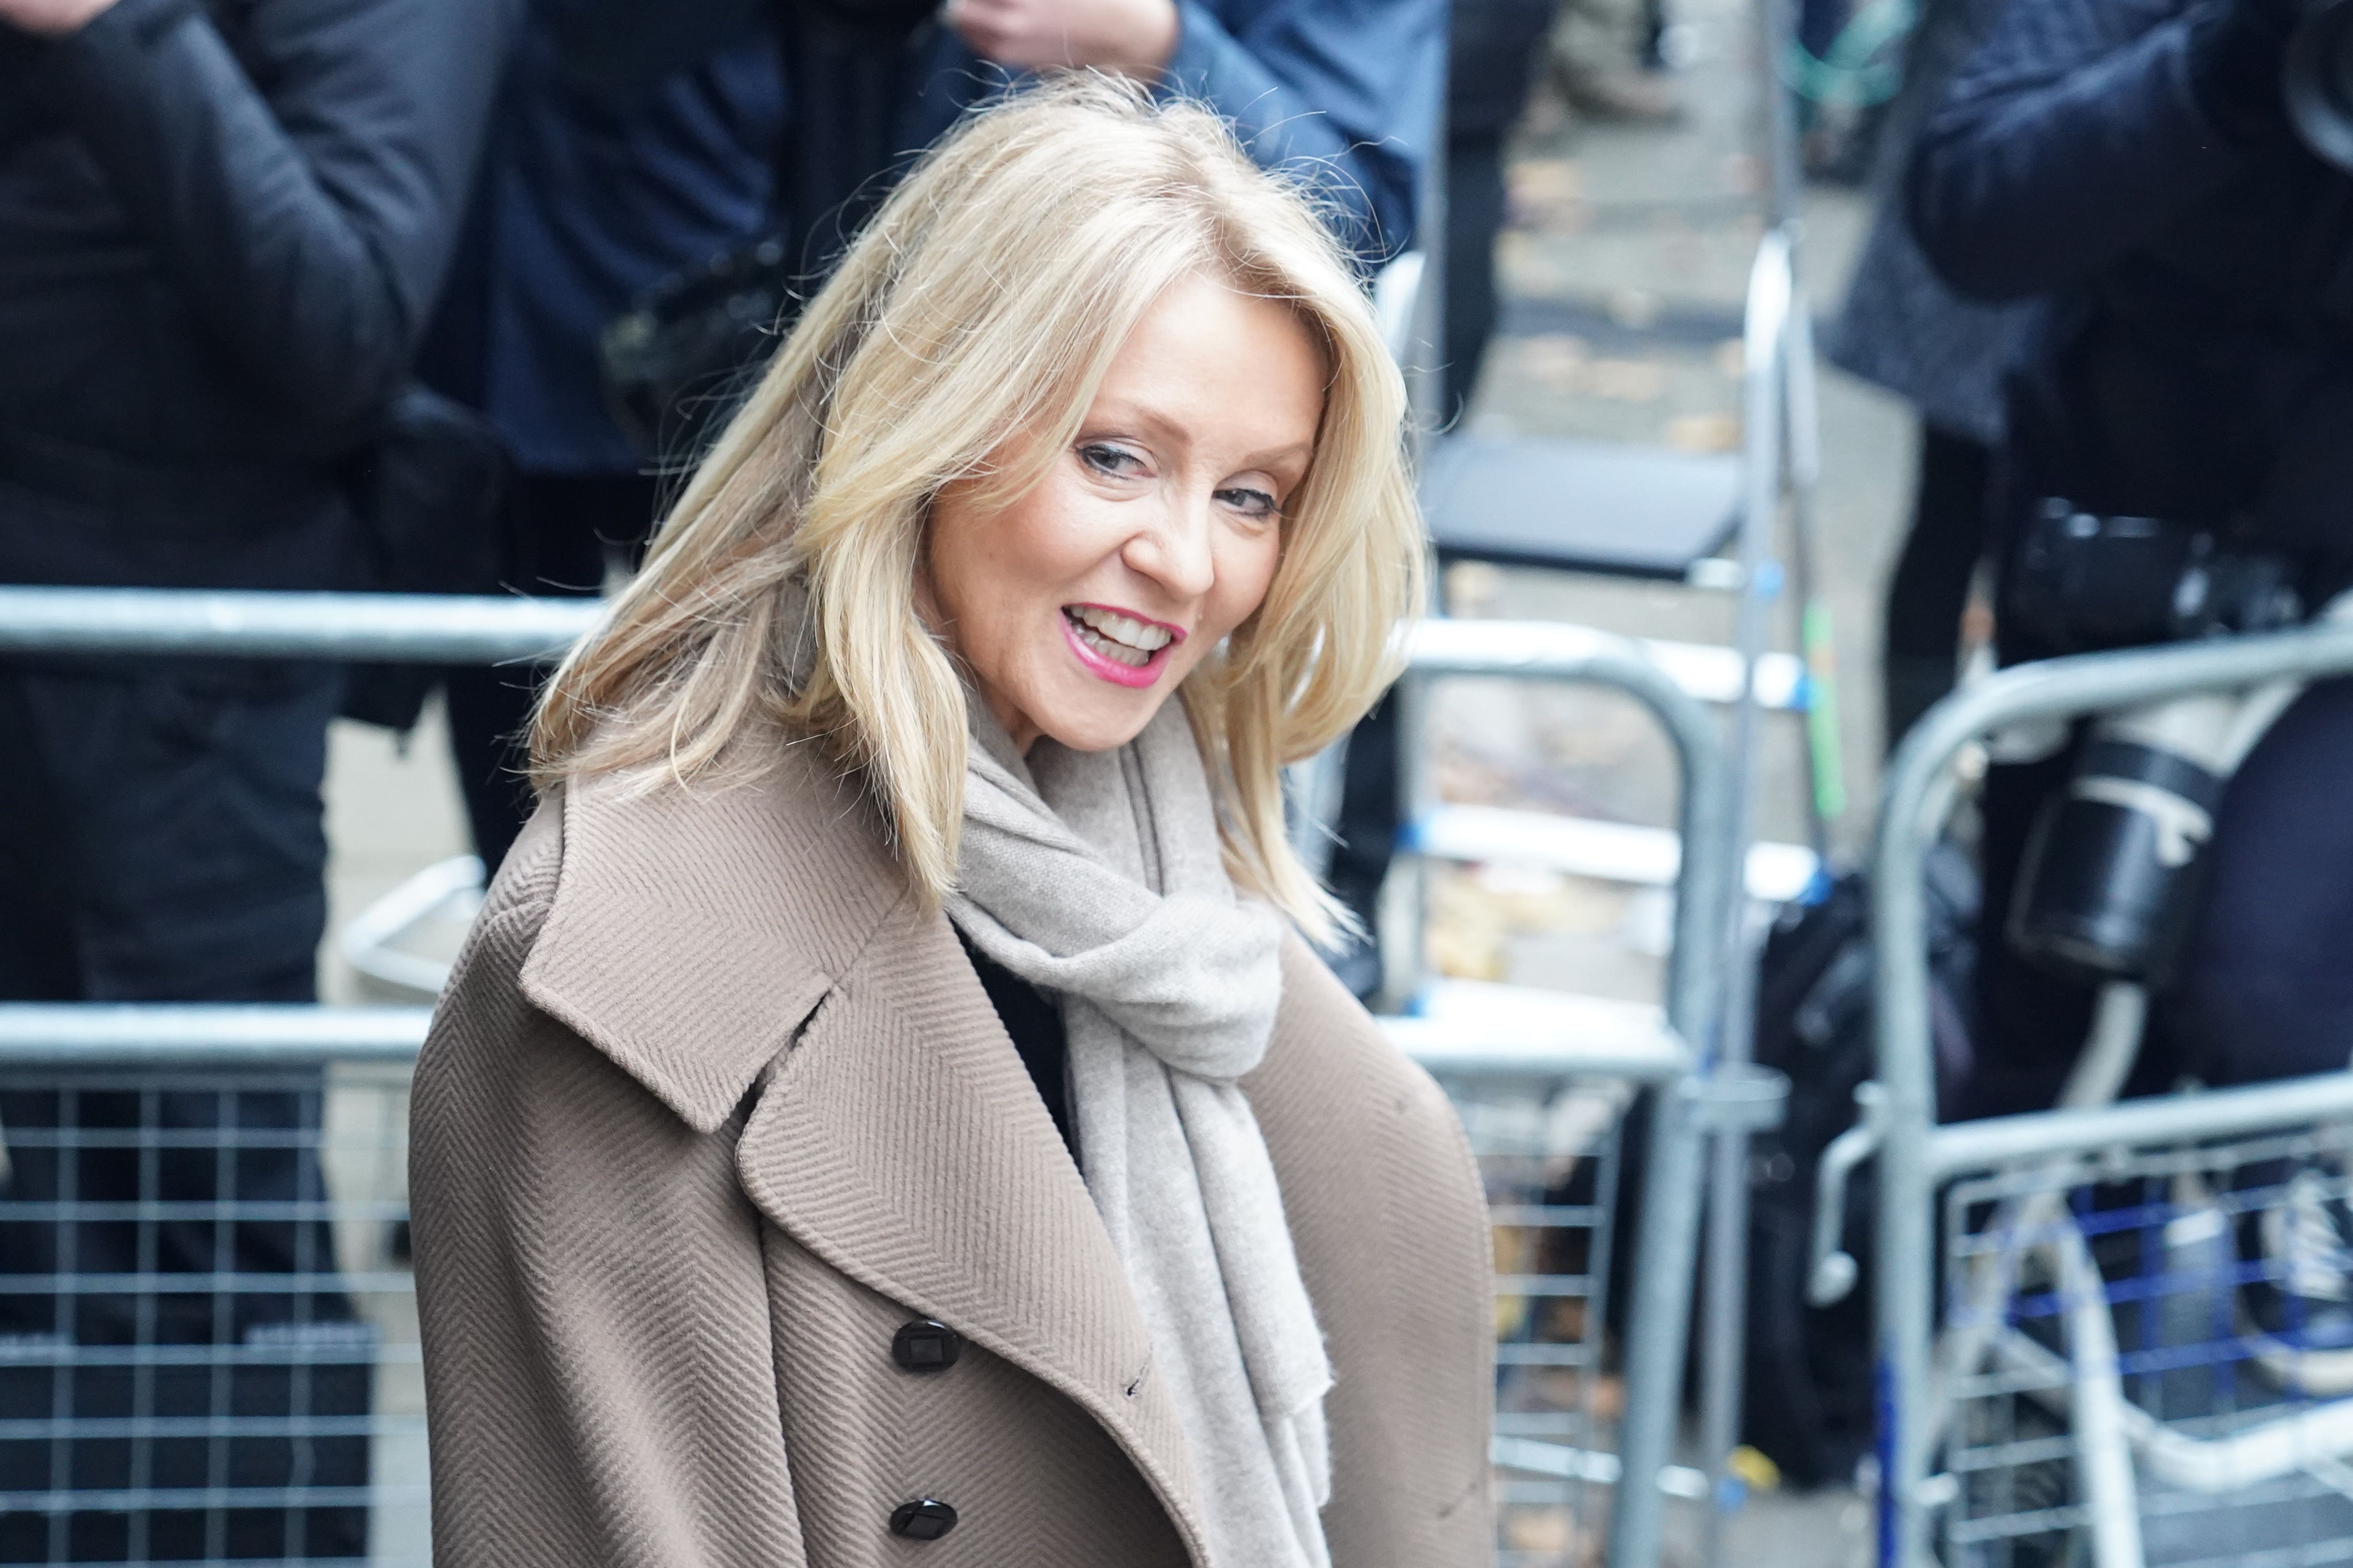 Esther McVey, the so-called minister for common sense, has criticised wasteful government spending